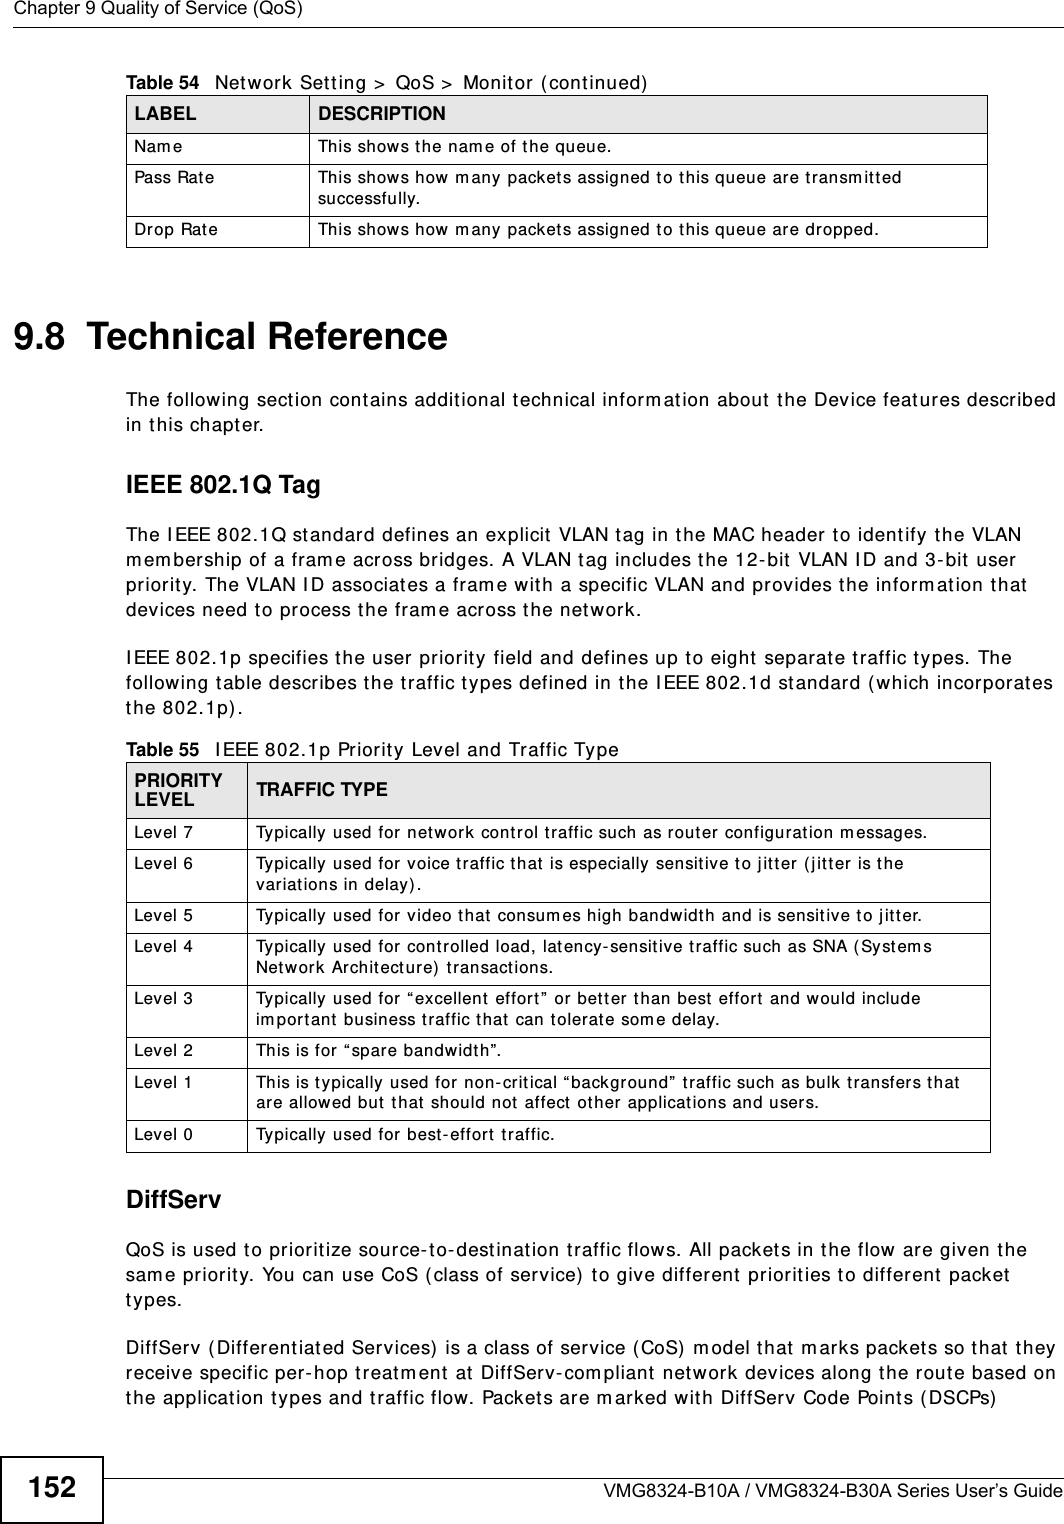 Chapter 9 Quality of Service (QoS)VMG8324-B10A / VMG8324-B30A Series User’s Guide1529.8  Technical ReferenceThe following sect ion cont ains additional t echnical inform ation about  the Device feat ures described in this chapt er.IEEE 802.1Q TagThe I EEE 802.1Q st andard defines an explicit  VLAN t ag in t he MAC header to identify the VLAN m em bership of a fram e across bridges. A VLAN t ag includes t he 12-bit VLAN I D and 3- bit  user priority. The VLAN I D associat es a fram e wit h a specific VLAN and provides the inform at ion t hat  devices need t o process t he fram e across t he net work. I EEE 802.1p specifies t he user priorit y field and defines up t o eight  separate t raffic t ypes. The following table describes t he t raffic types defined in t he I EEE 802.1d st andard ( which incorporat es the 802.1p).  DiffServ QoS is used to prioritize source-t o- dest ination traffic flows. All packets in t he flow are given t he sam e priorit y. You can use CoS ( class of service)  t o give different priorities to differ ent packet types.DiffServ ( Differentiat ed Services)  is a class of ser vice ( CoS)  m odel t hat  m arks packet s so t hat  t hey receive specific per- hop t reat m ent at DiffServ- com pliant  net w ork devices along t he rout e based on the applicat ion types and traffic flow. Packet s are m arked with DiffServ Code Point s ( DSCPs)  Nam e This shows t he nam e of t he queue. Pass Rat e This shows how  m any pack et s assigned t o t his queue ar e t ransm it t ed successfully.Drop Rat e This shows how m any  packets assigned to this queue are dropped.Table 54   Net work Sett ing &gt;  QoS &gt;  Monit or ( continued)LABEL DESCRIPTIONTable 55   I EEE 802.1p Pr iority Level and Traffic TypePRIORITY LEVEL TRAFFIC TYPELevel 7 Typically used for network contr ol t raffic such as router configuration m essages.Level 6 Typically used for voice traffic t hat is especially sensit ive t o j it t er  ( j it t er is the variat ions in delay) .Level 5 Typically used for video t hat  consum es high bandwidt h and is sensitive to j it t er.Level 4 Typically used for cont rolled load, lat ency- sensit ive t raffic such as SNA ( Syst em s Networ k Archit ect ure) transact ions.Level 3 Typically used for “ excellent  effort ”  or bet t er than best  effort  and would include im port ant business traffic that can t olerate som e delay.Level 2 This is for “ spare bandwidt h”. Level 1 This is typically used for non- crit ical “ background” traffic such as bulk t ransfers that  are allowed but that should not  affect other applicat ions and users. Level 0 Typically used for best - effort traffic.